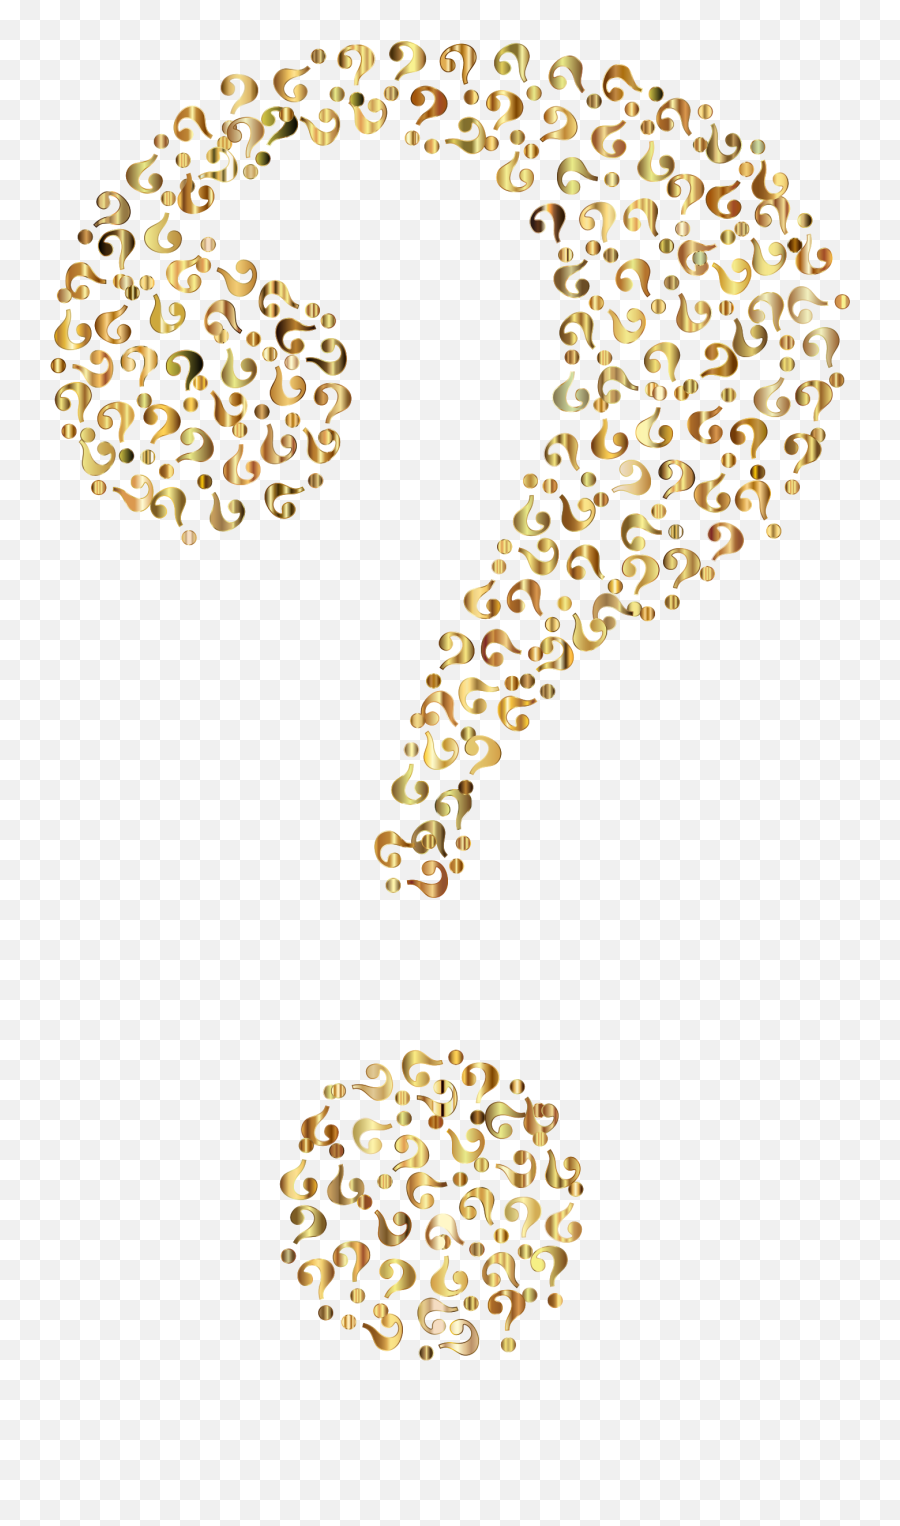 This Free Icons Png Design Of Prismatic Question Mark - Gold Sparkle Question Mark,Mark Png